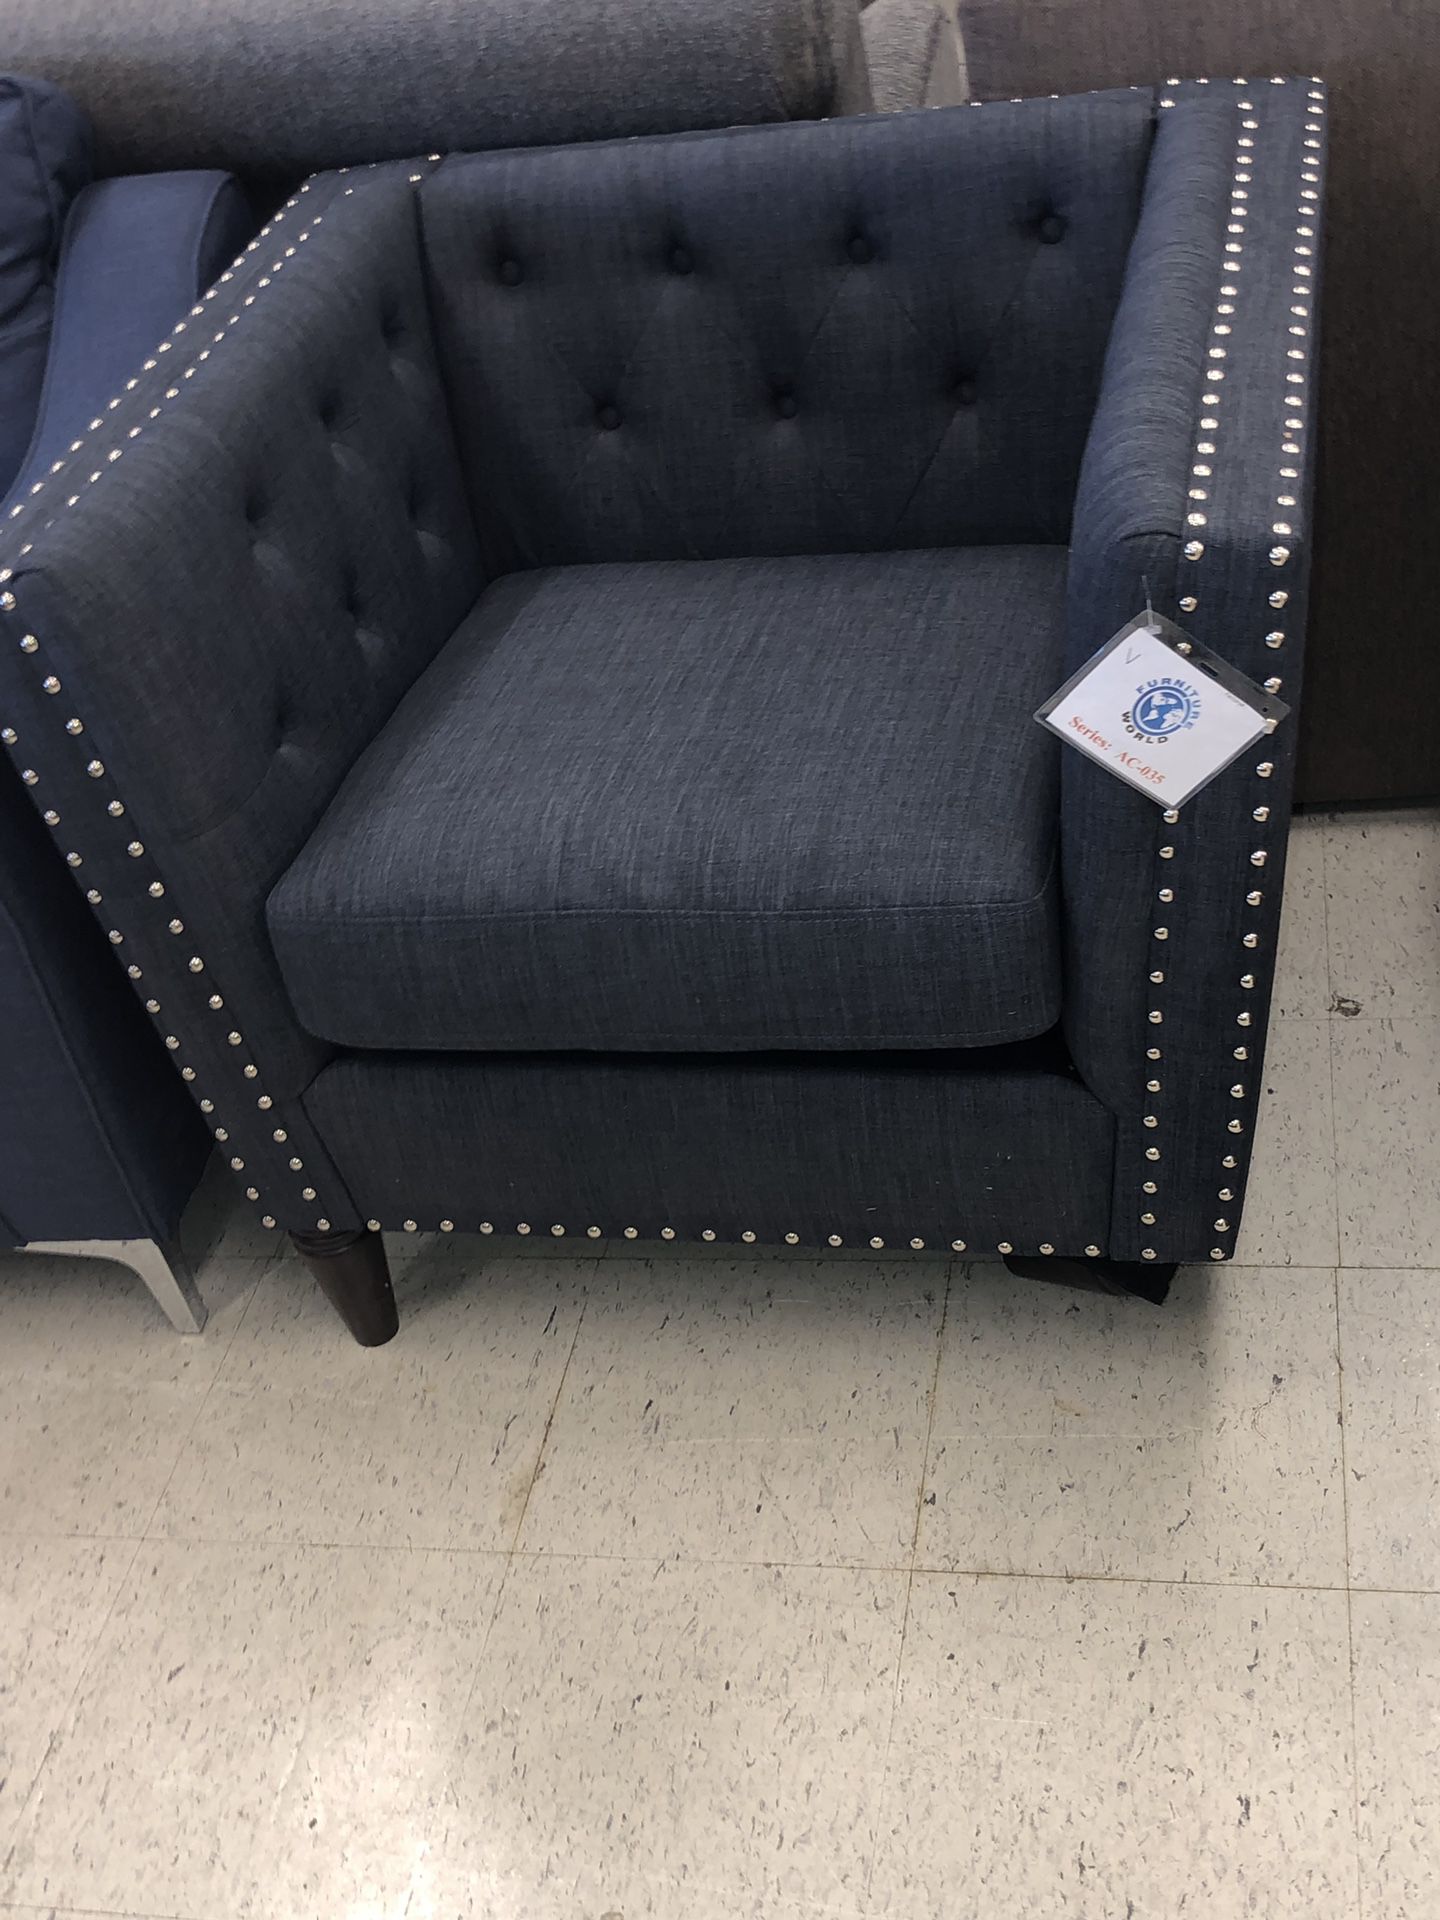 Huge furniture market sale up to 80% off display pieces only